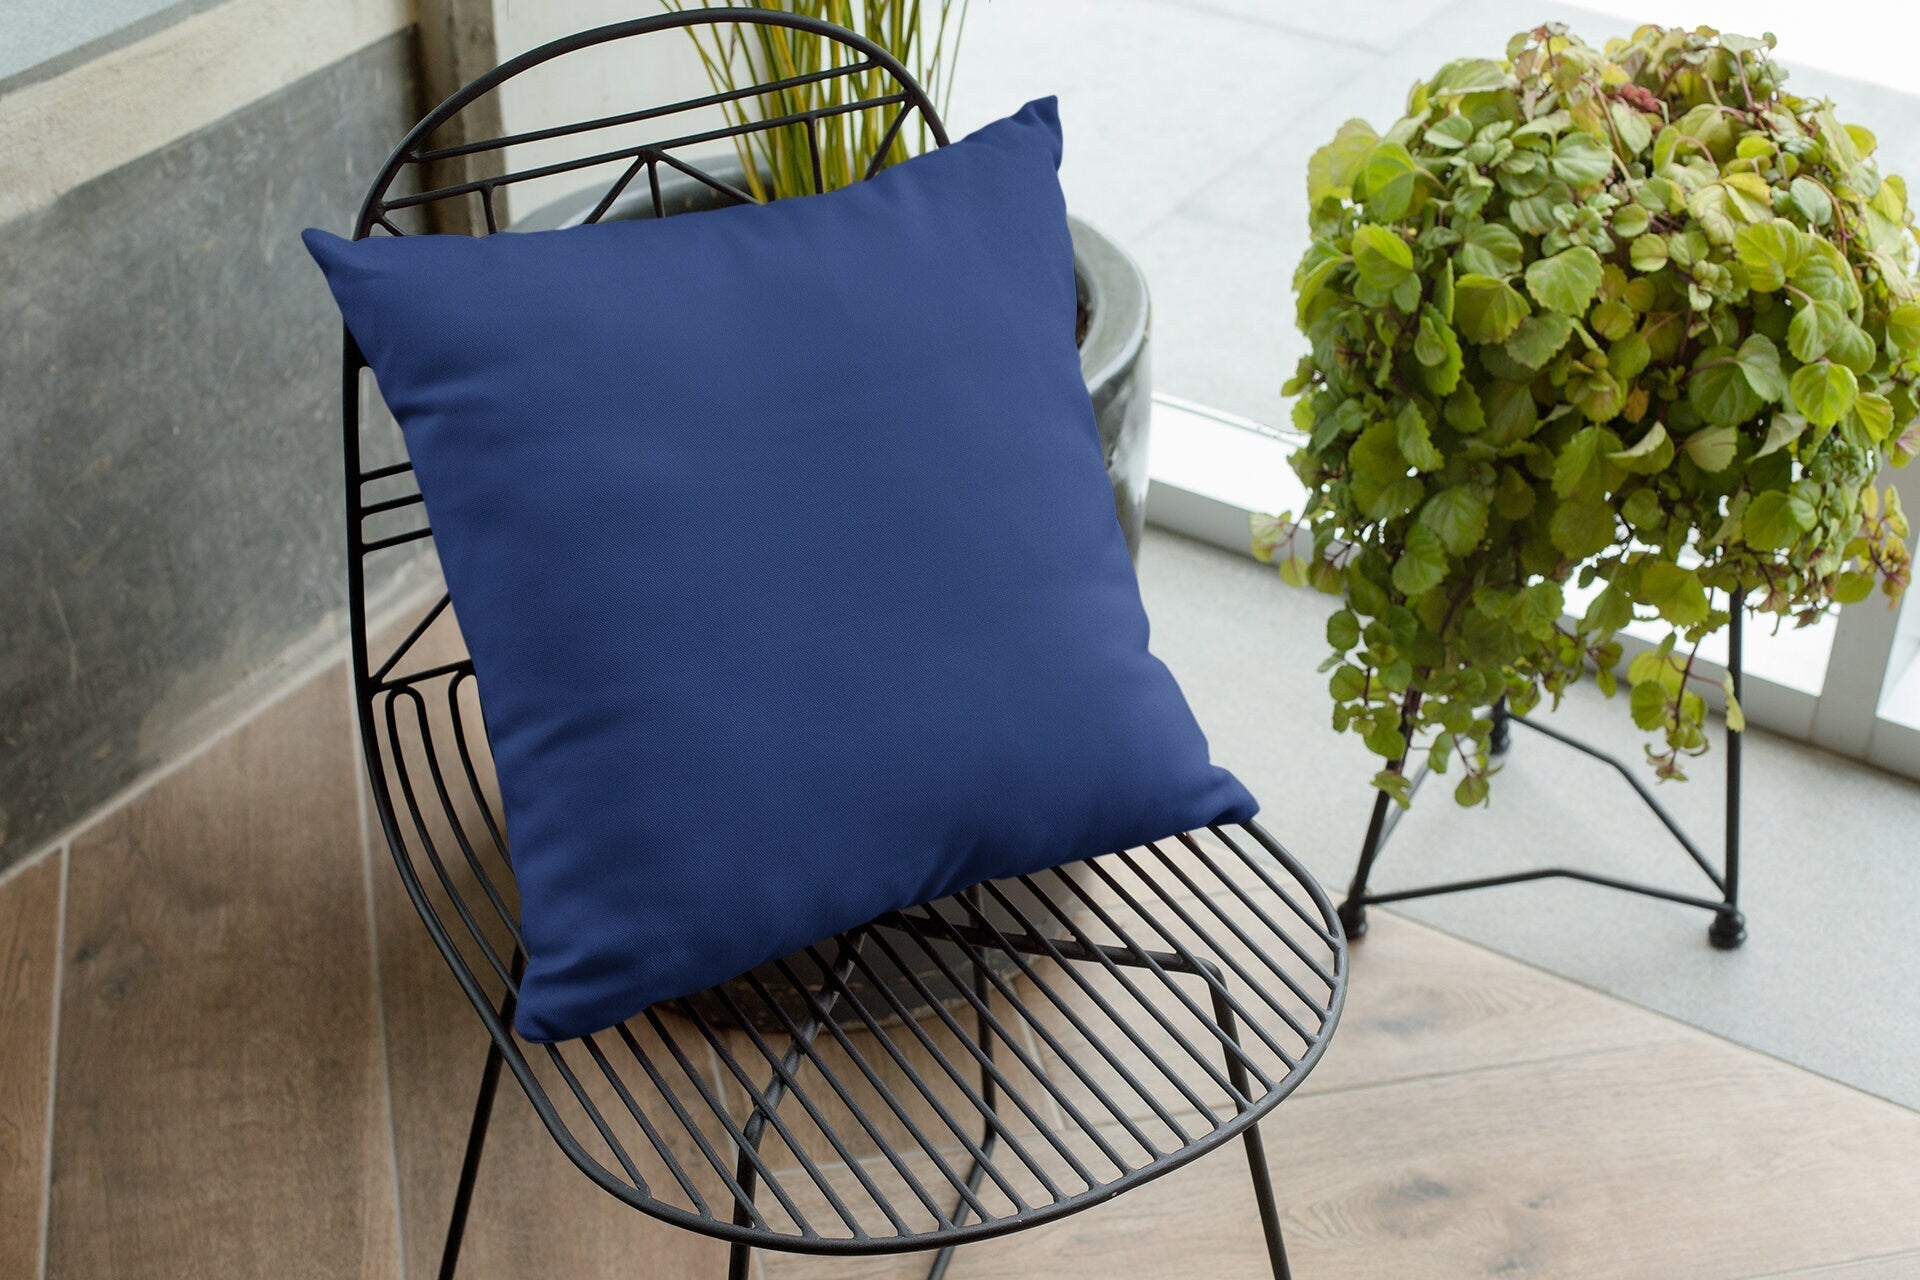 Blue Pillow Cover